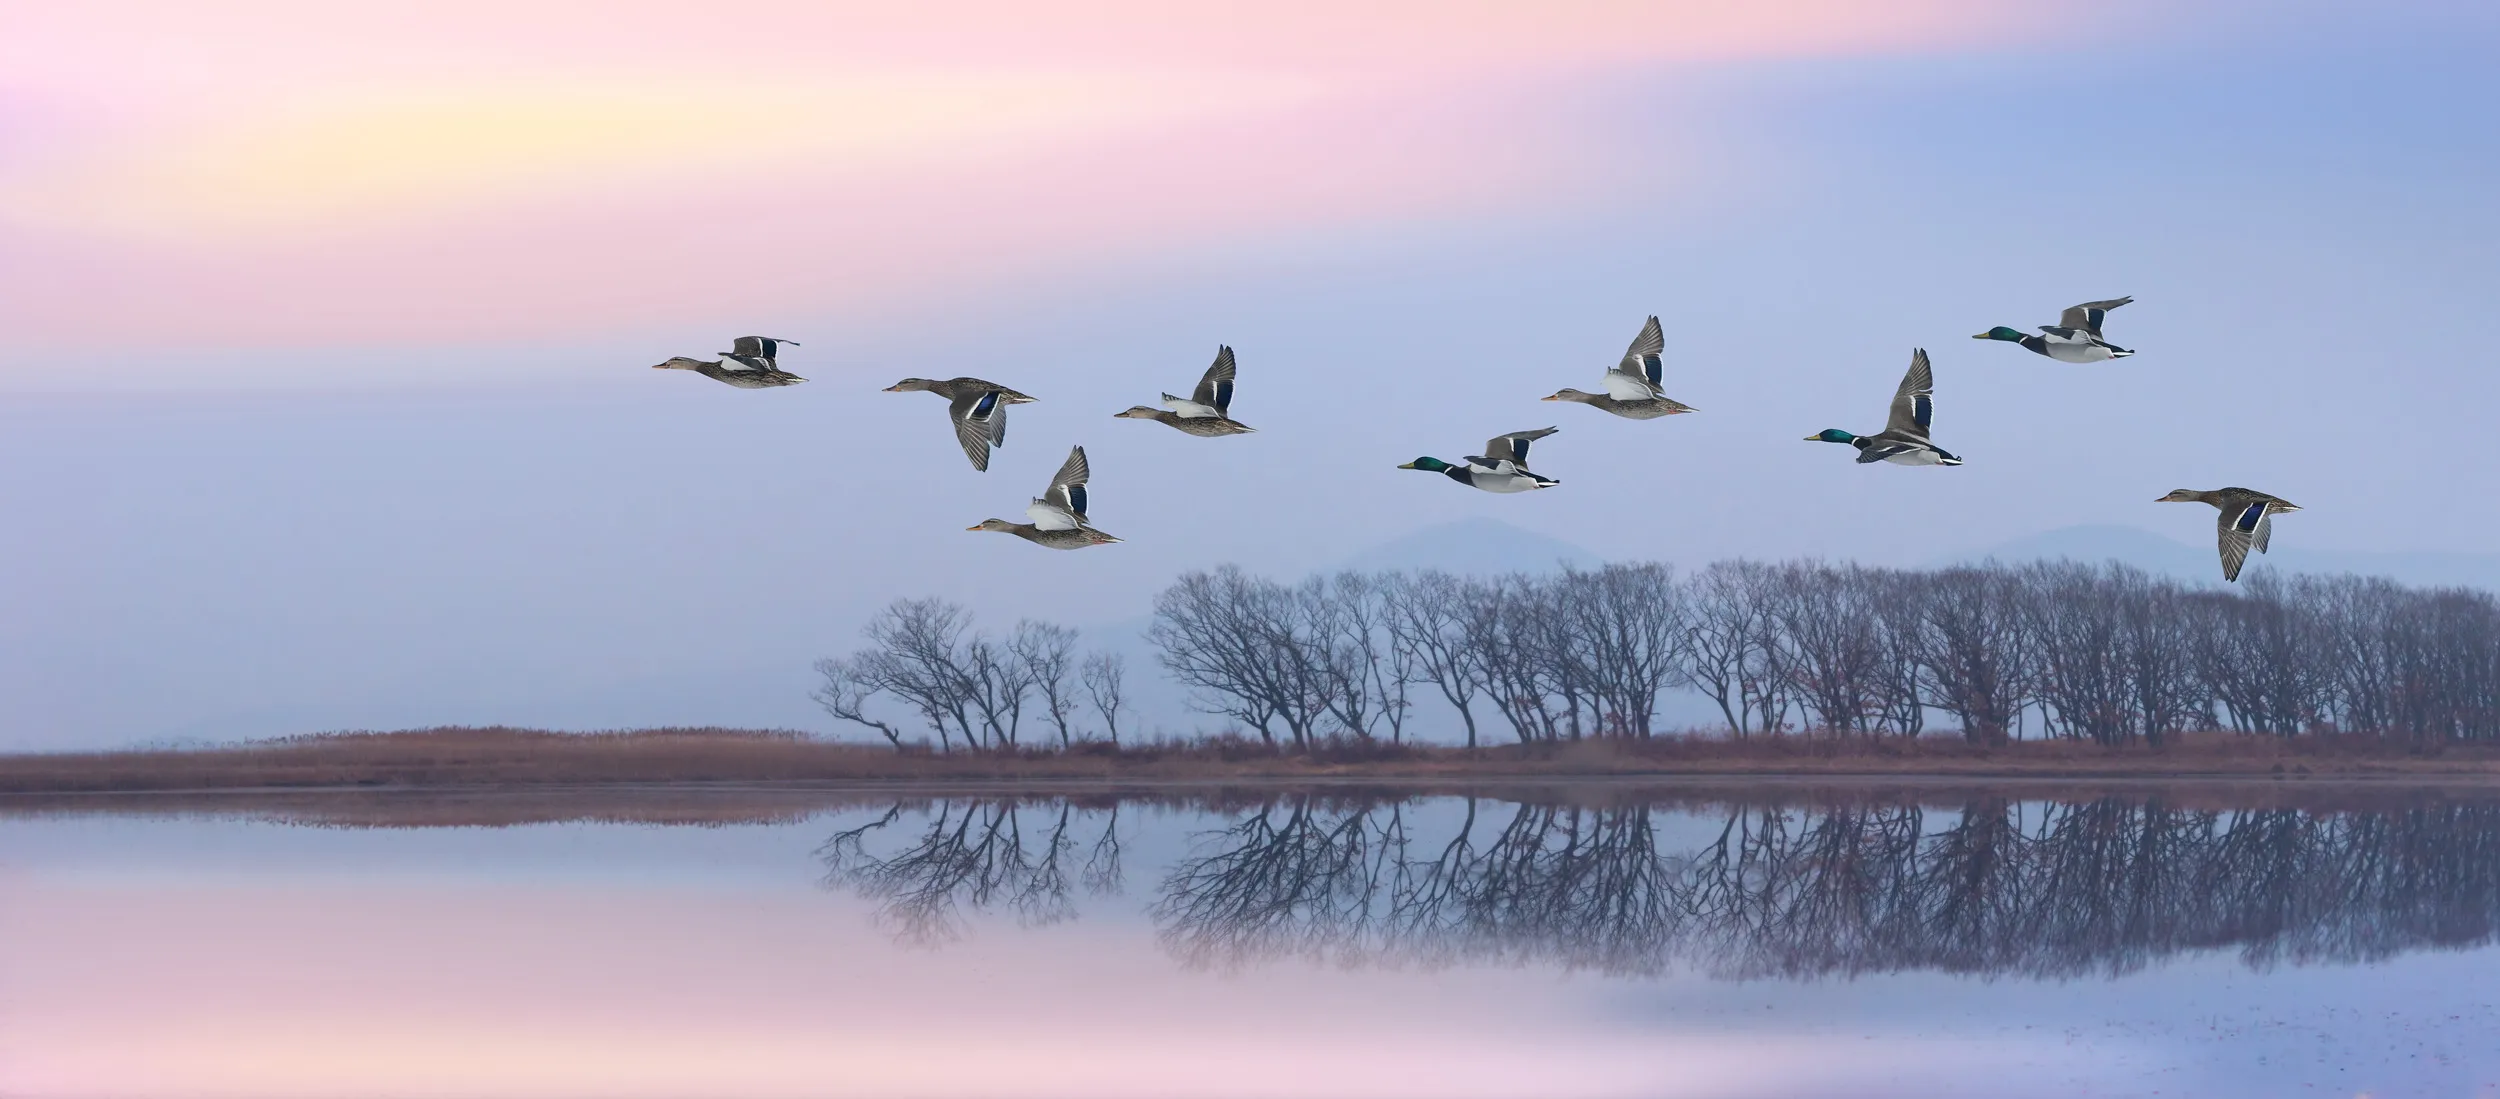 A group of nine Mallards flying over a lake at sunset.